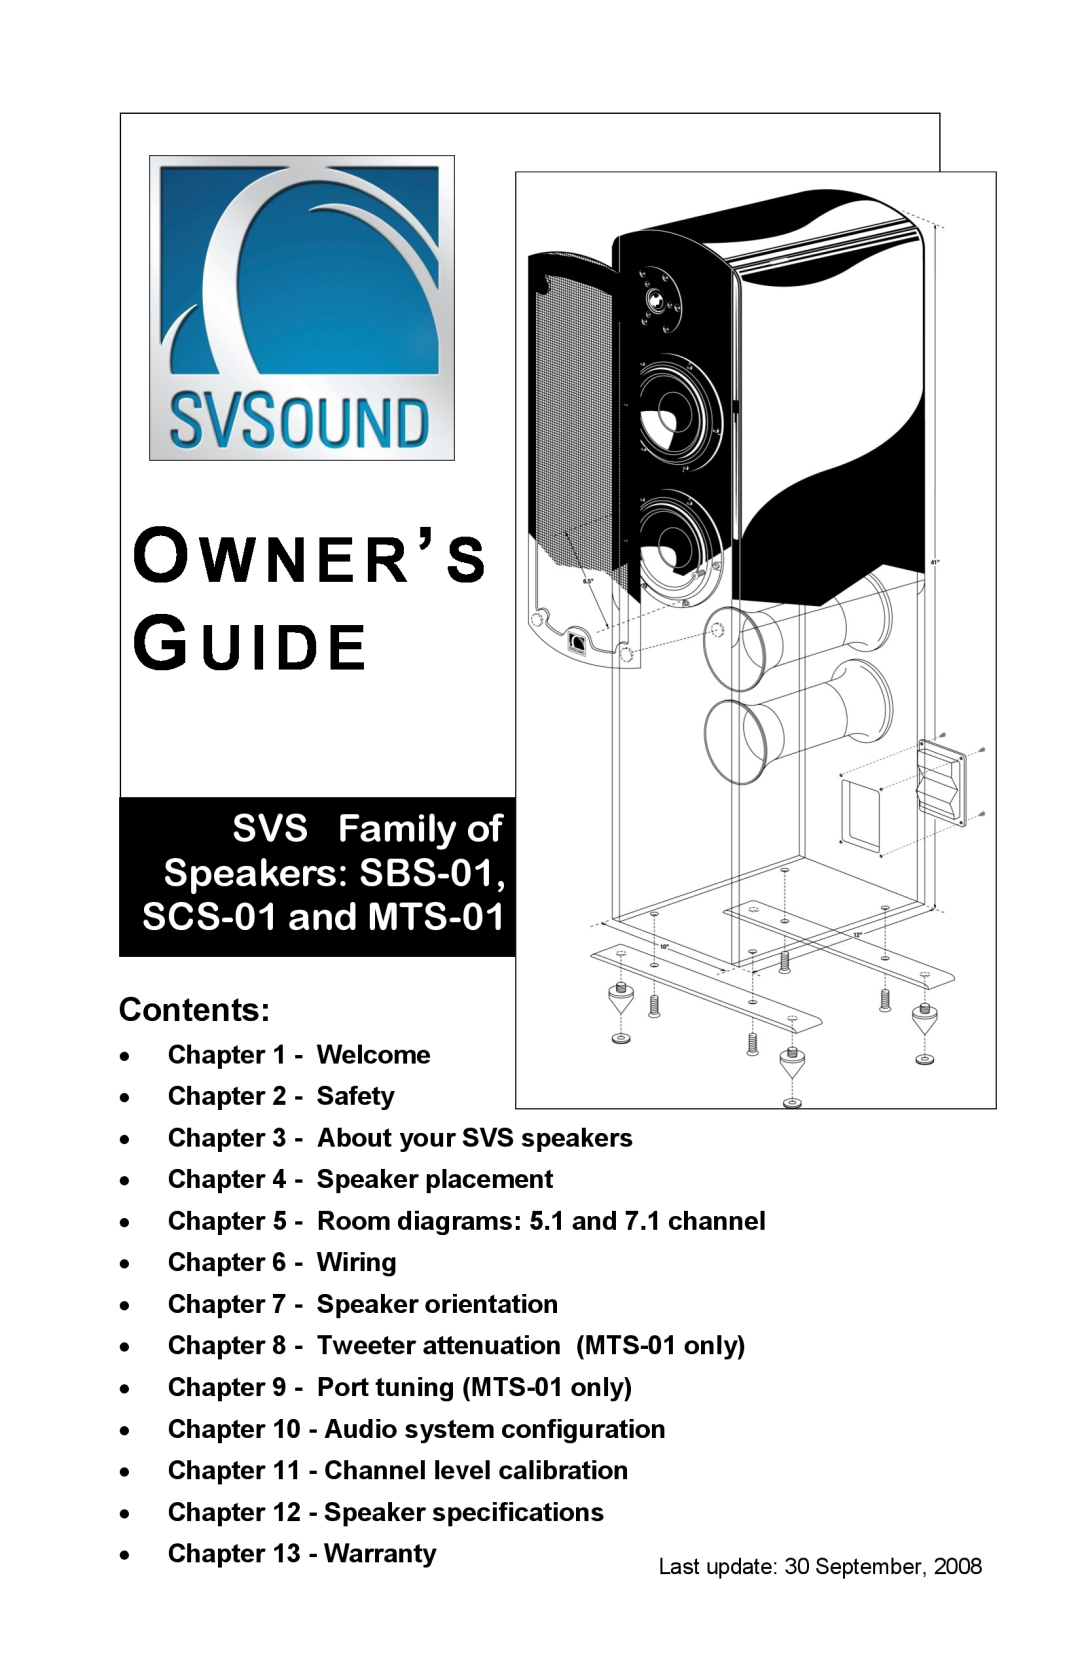 SV Sound specifications Contents, O W N E R ’ S Gu I D E, SVS Family of Speakers SBS-01 SCS-01and MTS-01 